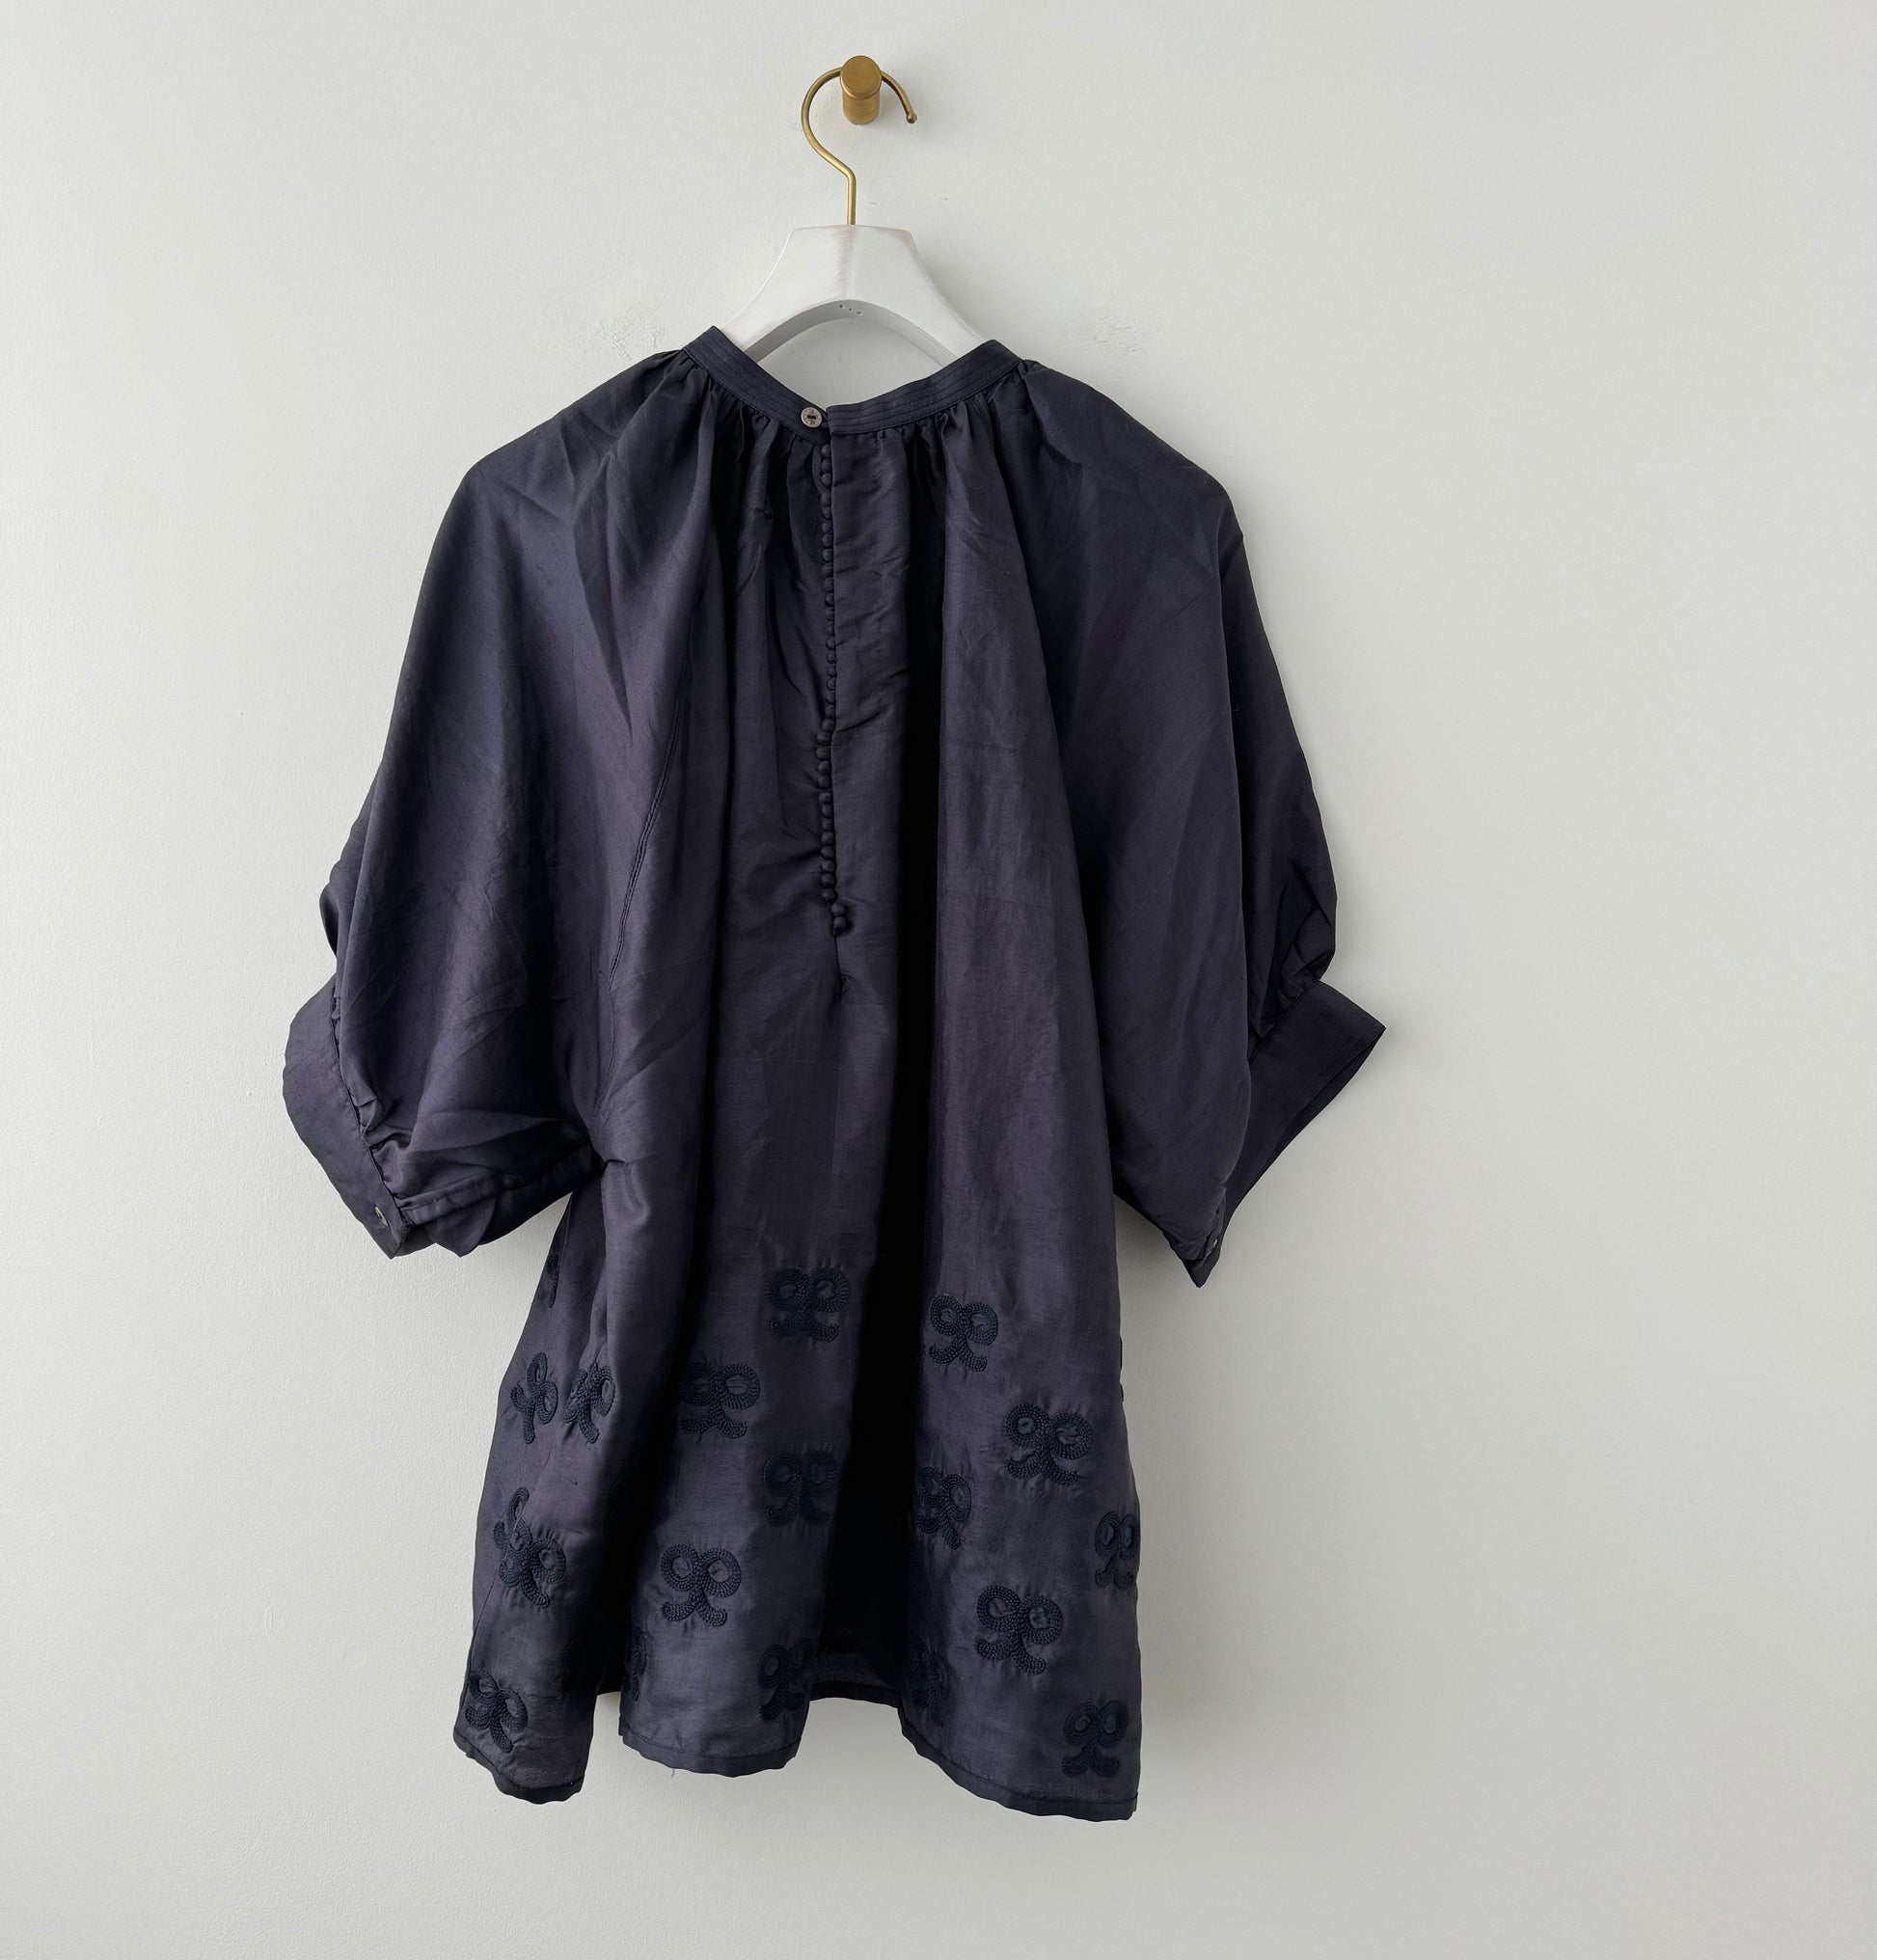 Tie Embroidery Blouse　BUNON　ブノン　ブラウス　通販　取扱店